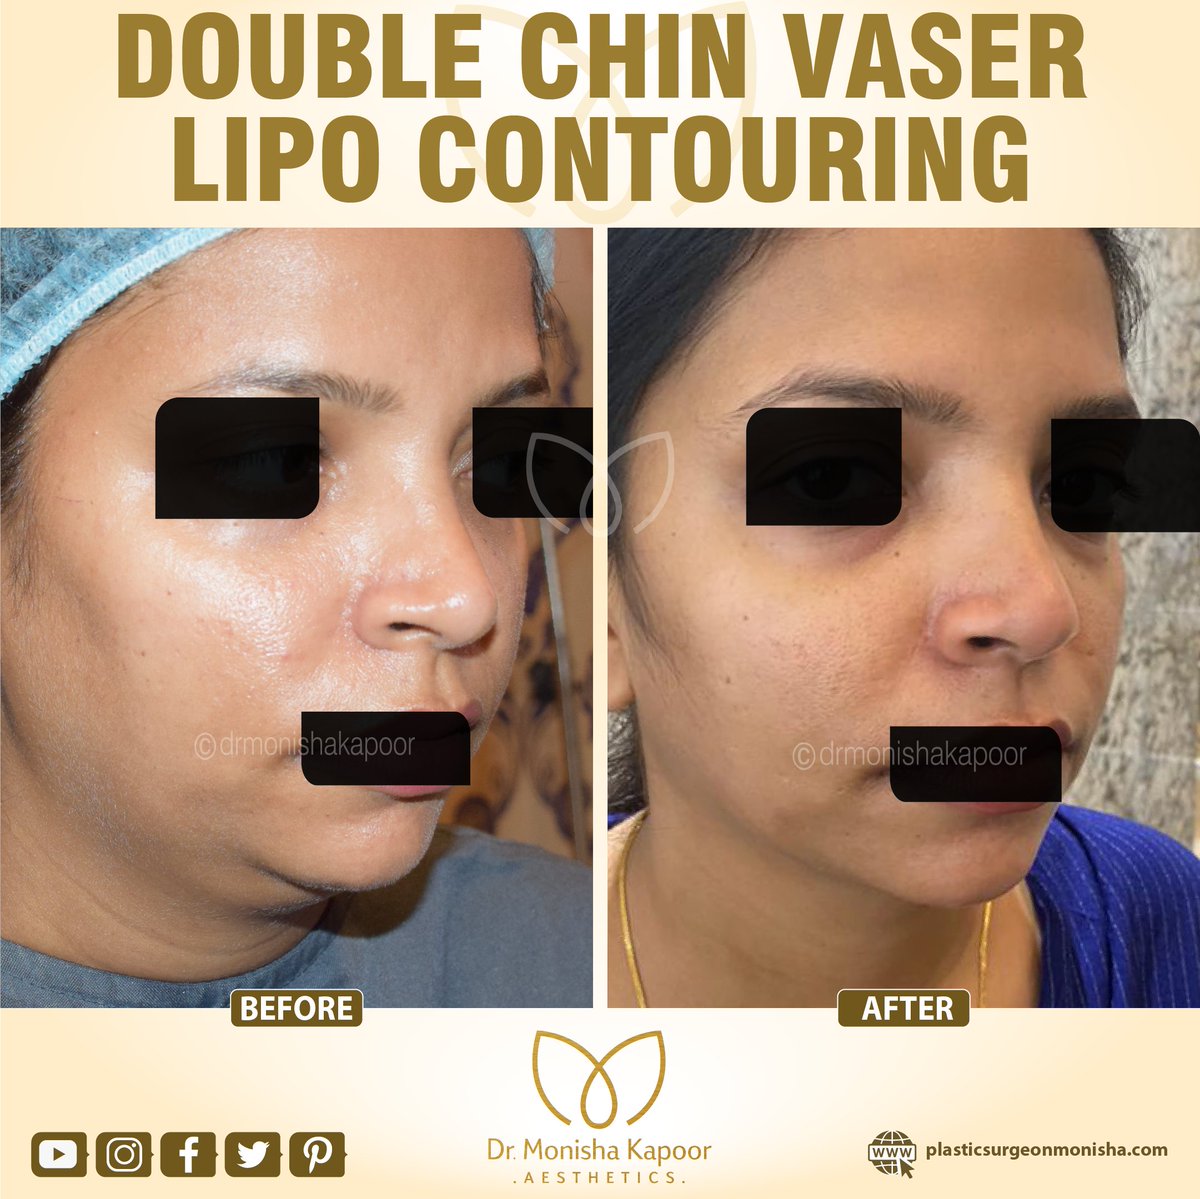 Double chin Liposuction is the best procedure recommended if you are trying to eliminate the excess fat from underneath the chin. With liposuction you start to see the results right away.

#chinremoval #chinliposuction
#chincontouring #chincontour
#plasticsurgery